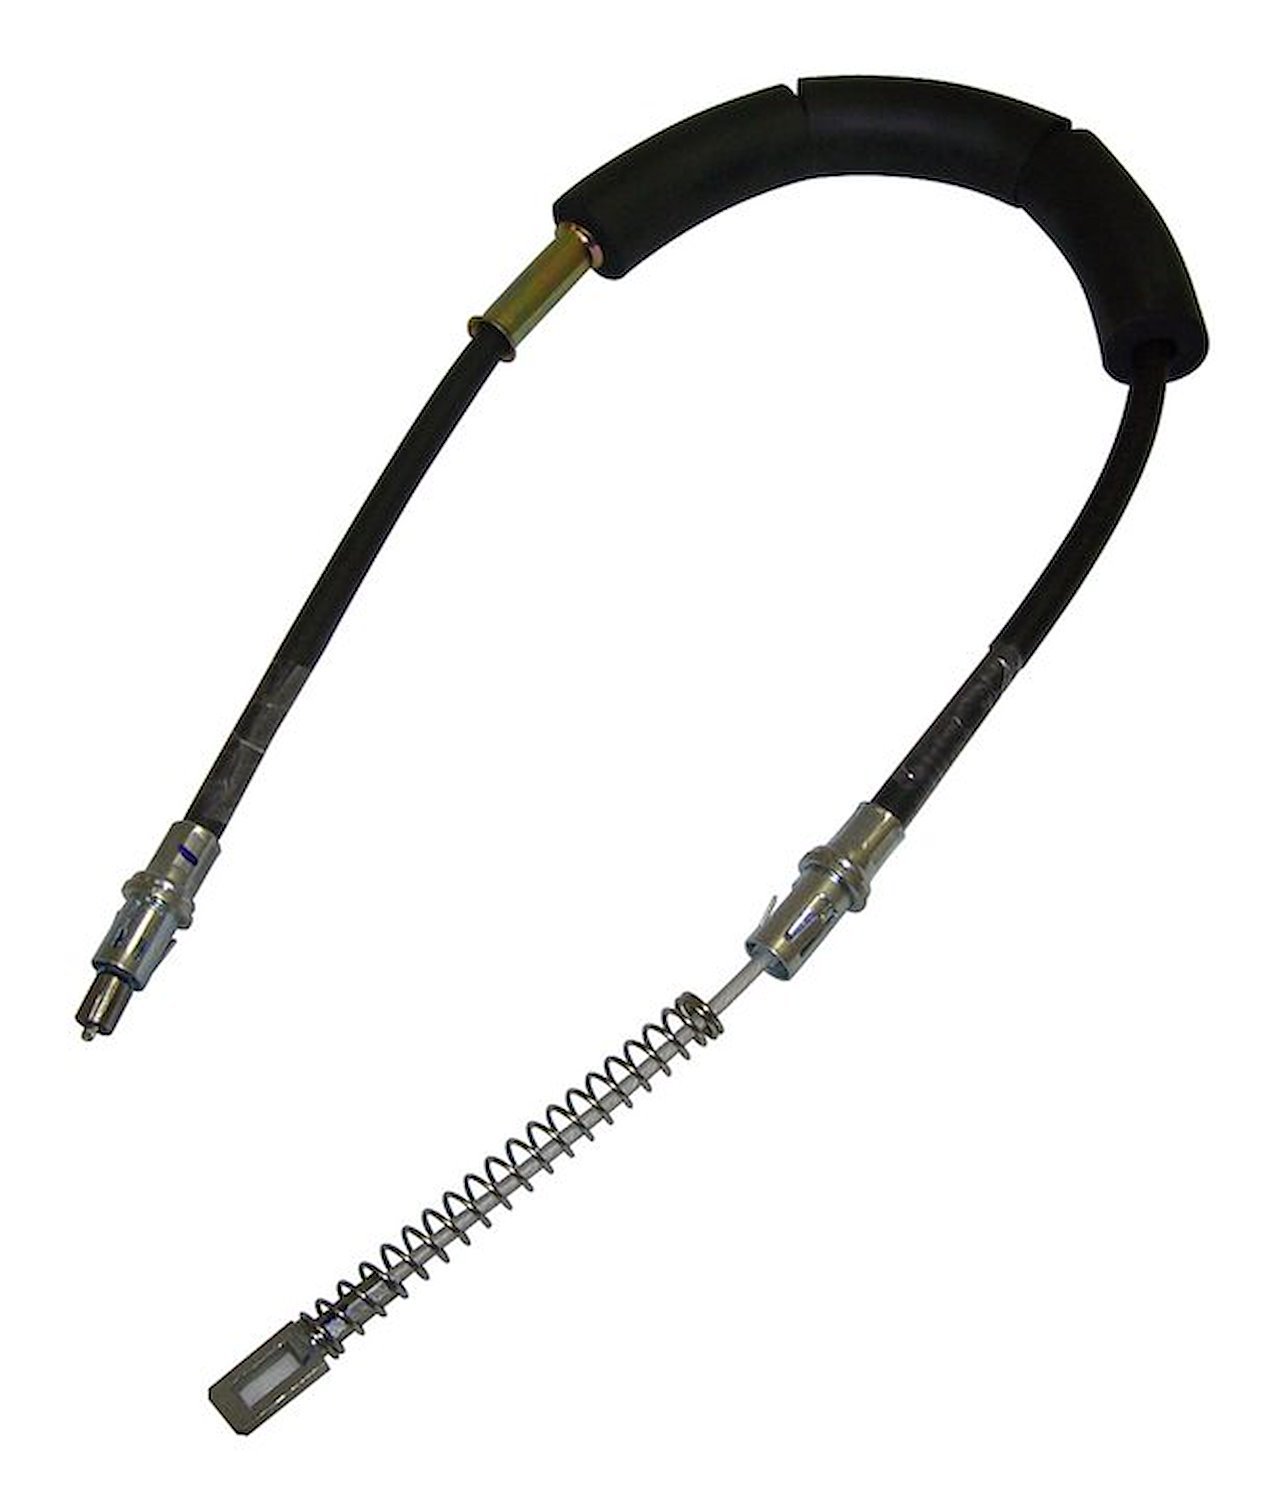 RT31020 Left Rear Parking Brake Cable for 1987-1990 Jeep YJ Wrangler w/ Rear Disc Conversion; 32.75" Long